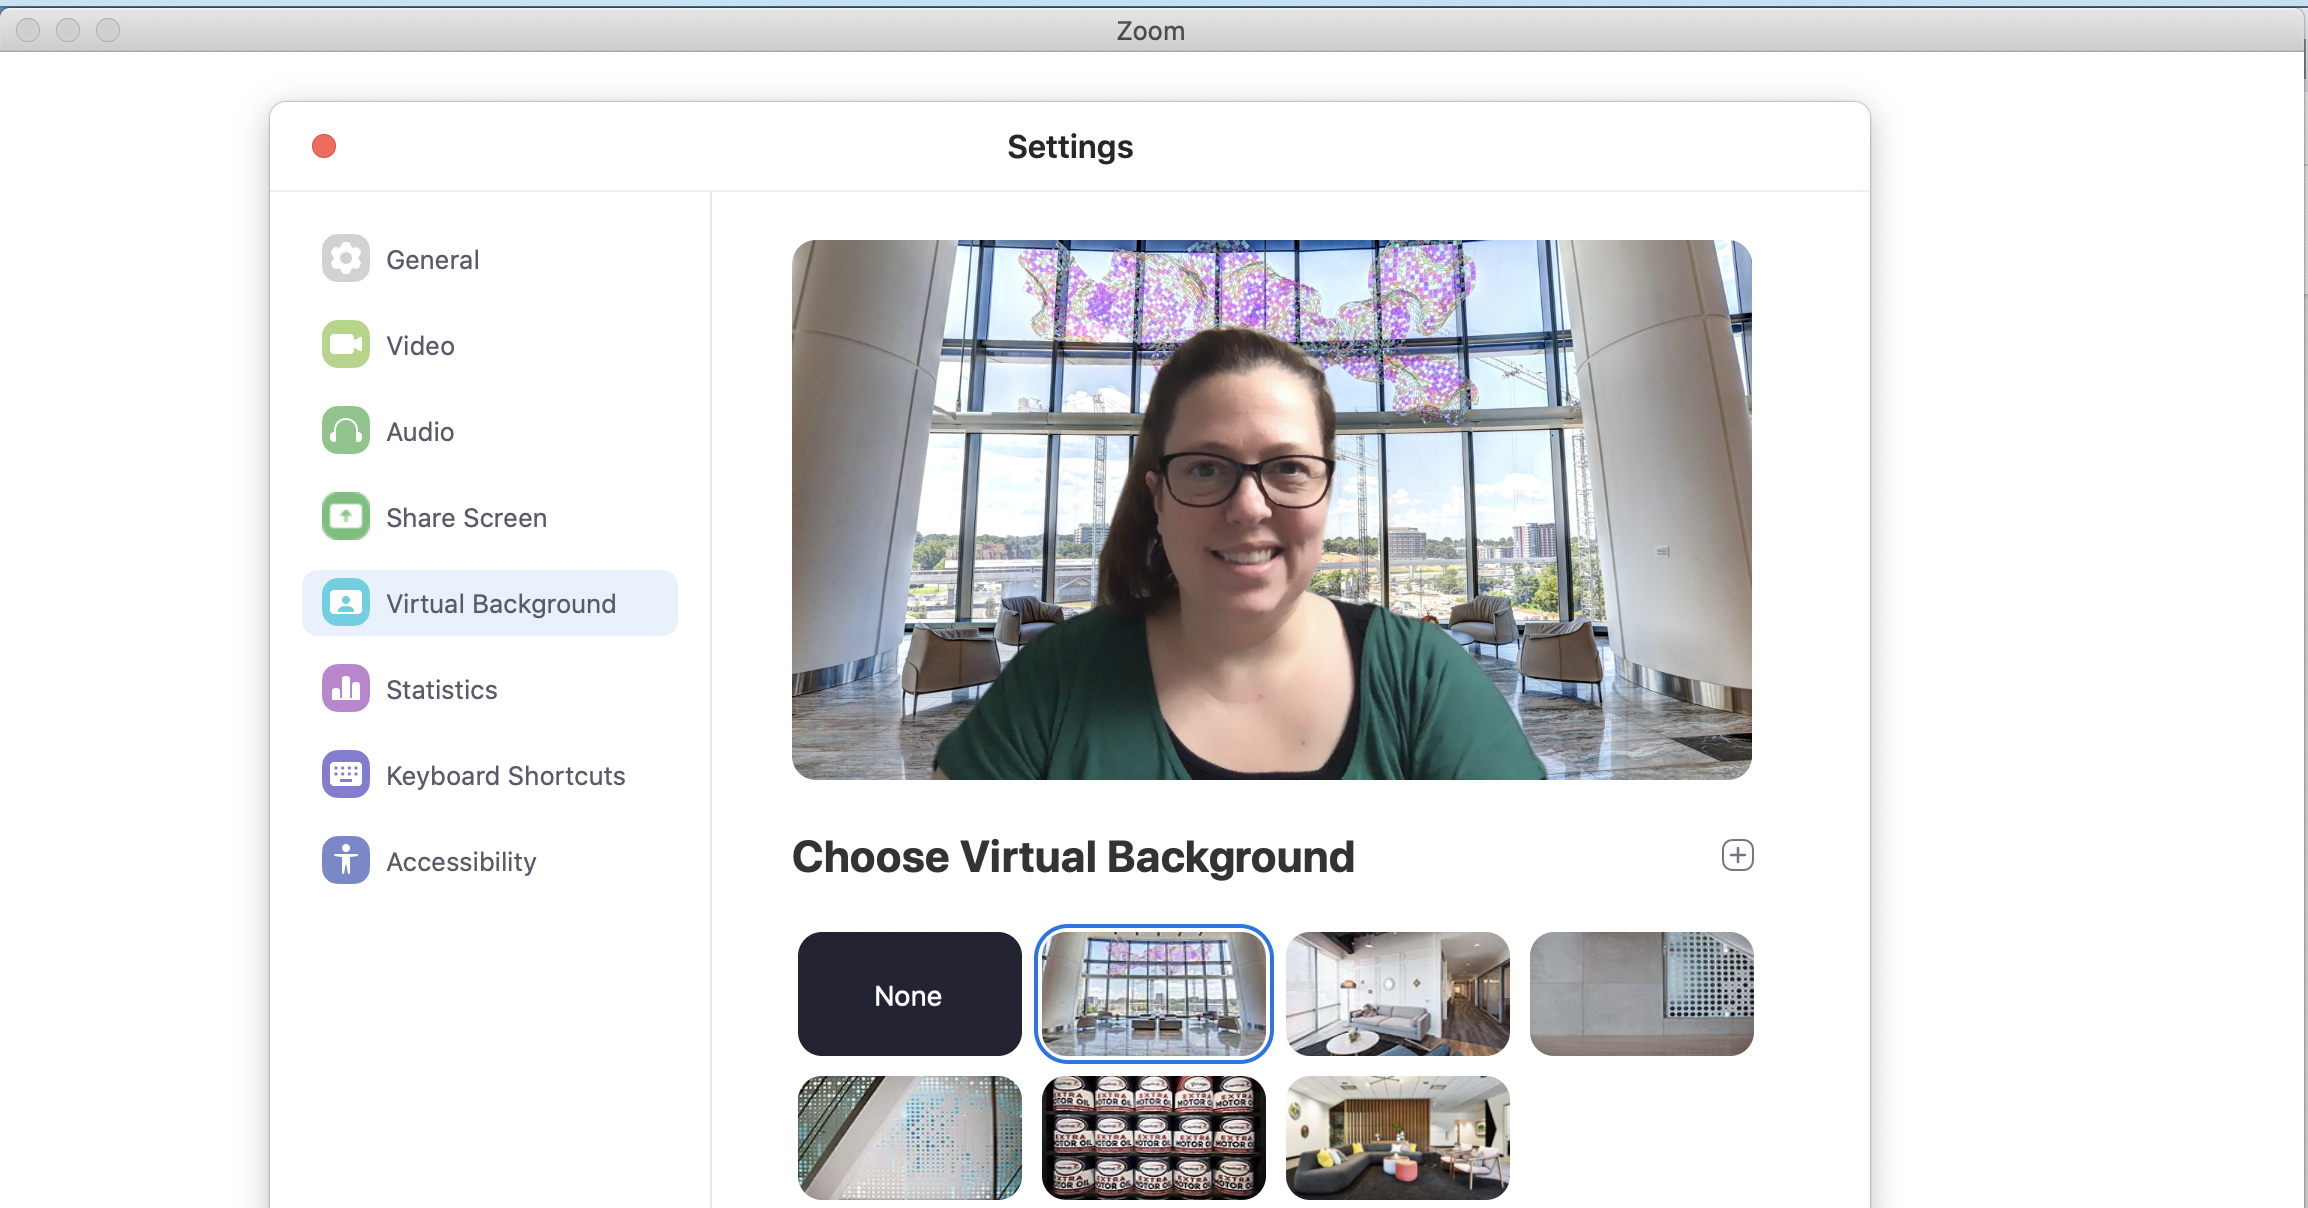 How to add a virtual background to your Zoom meeting